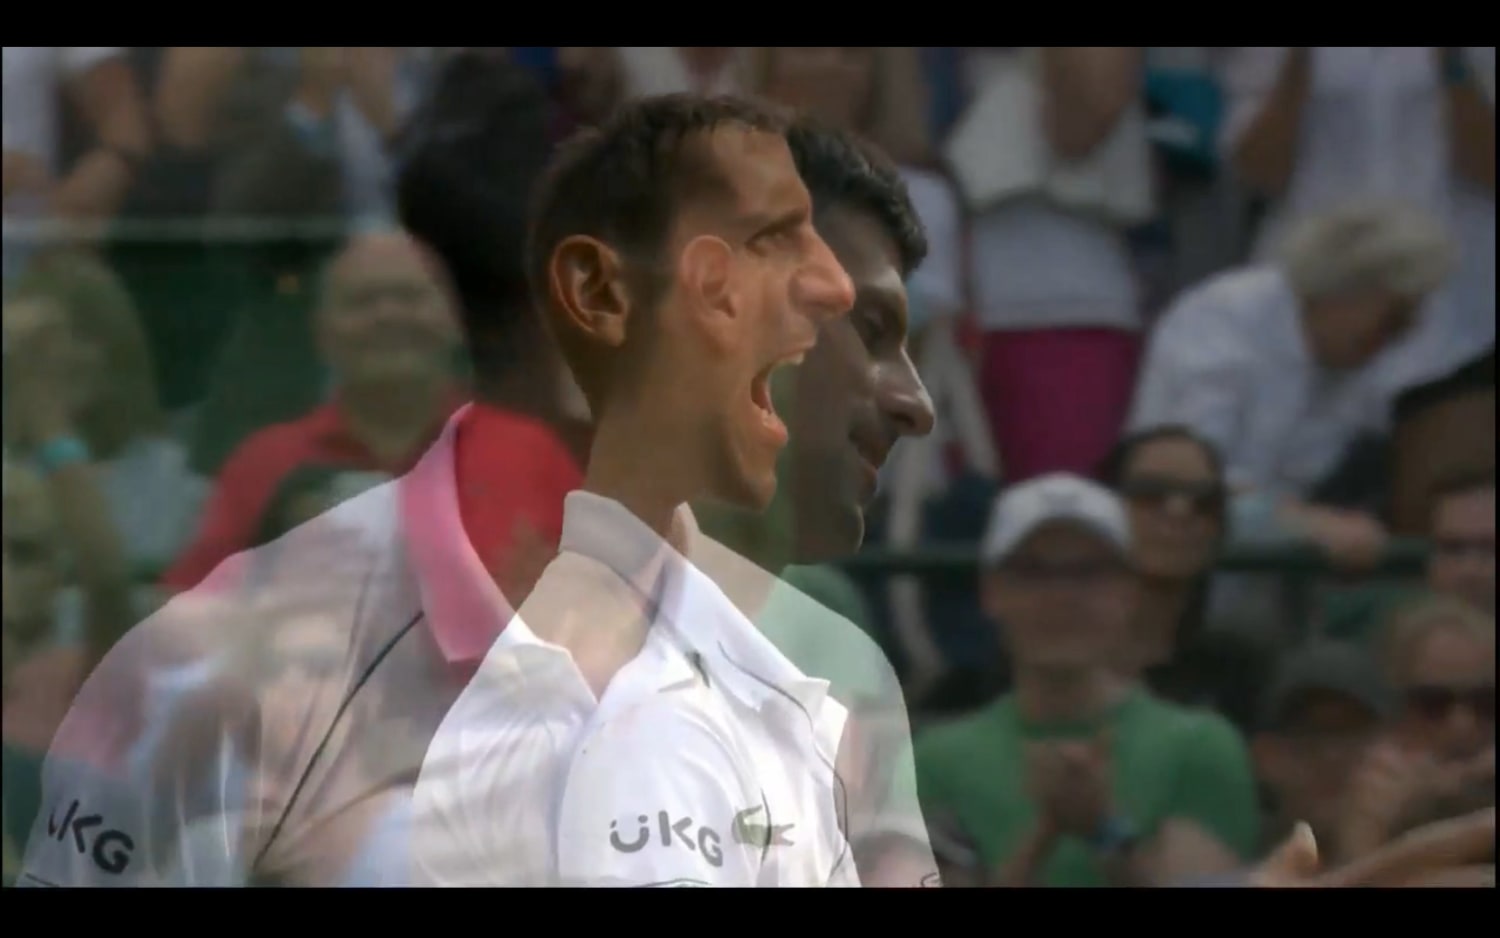 lovely embrace between Djokovic and Kudla after the match.